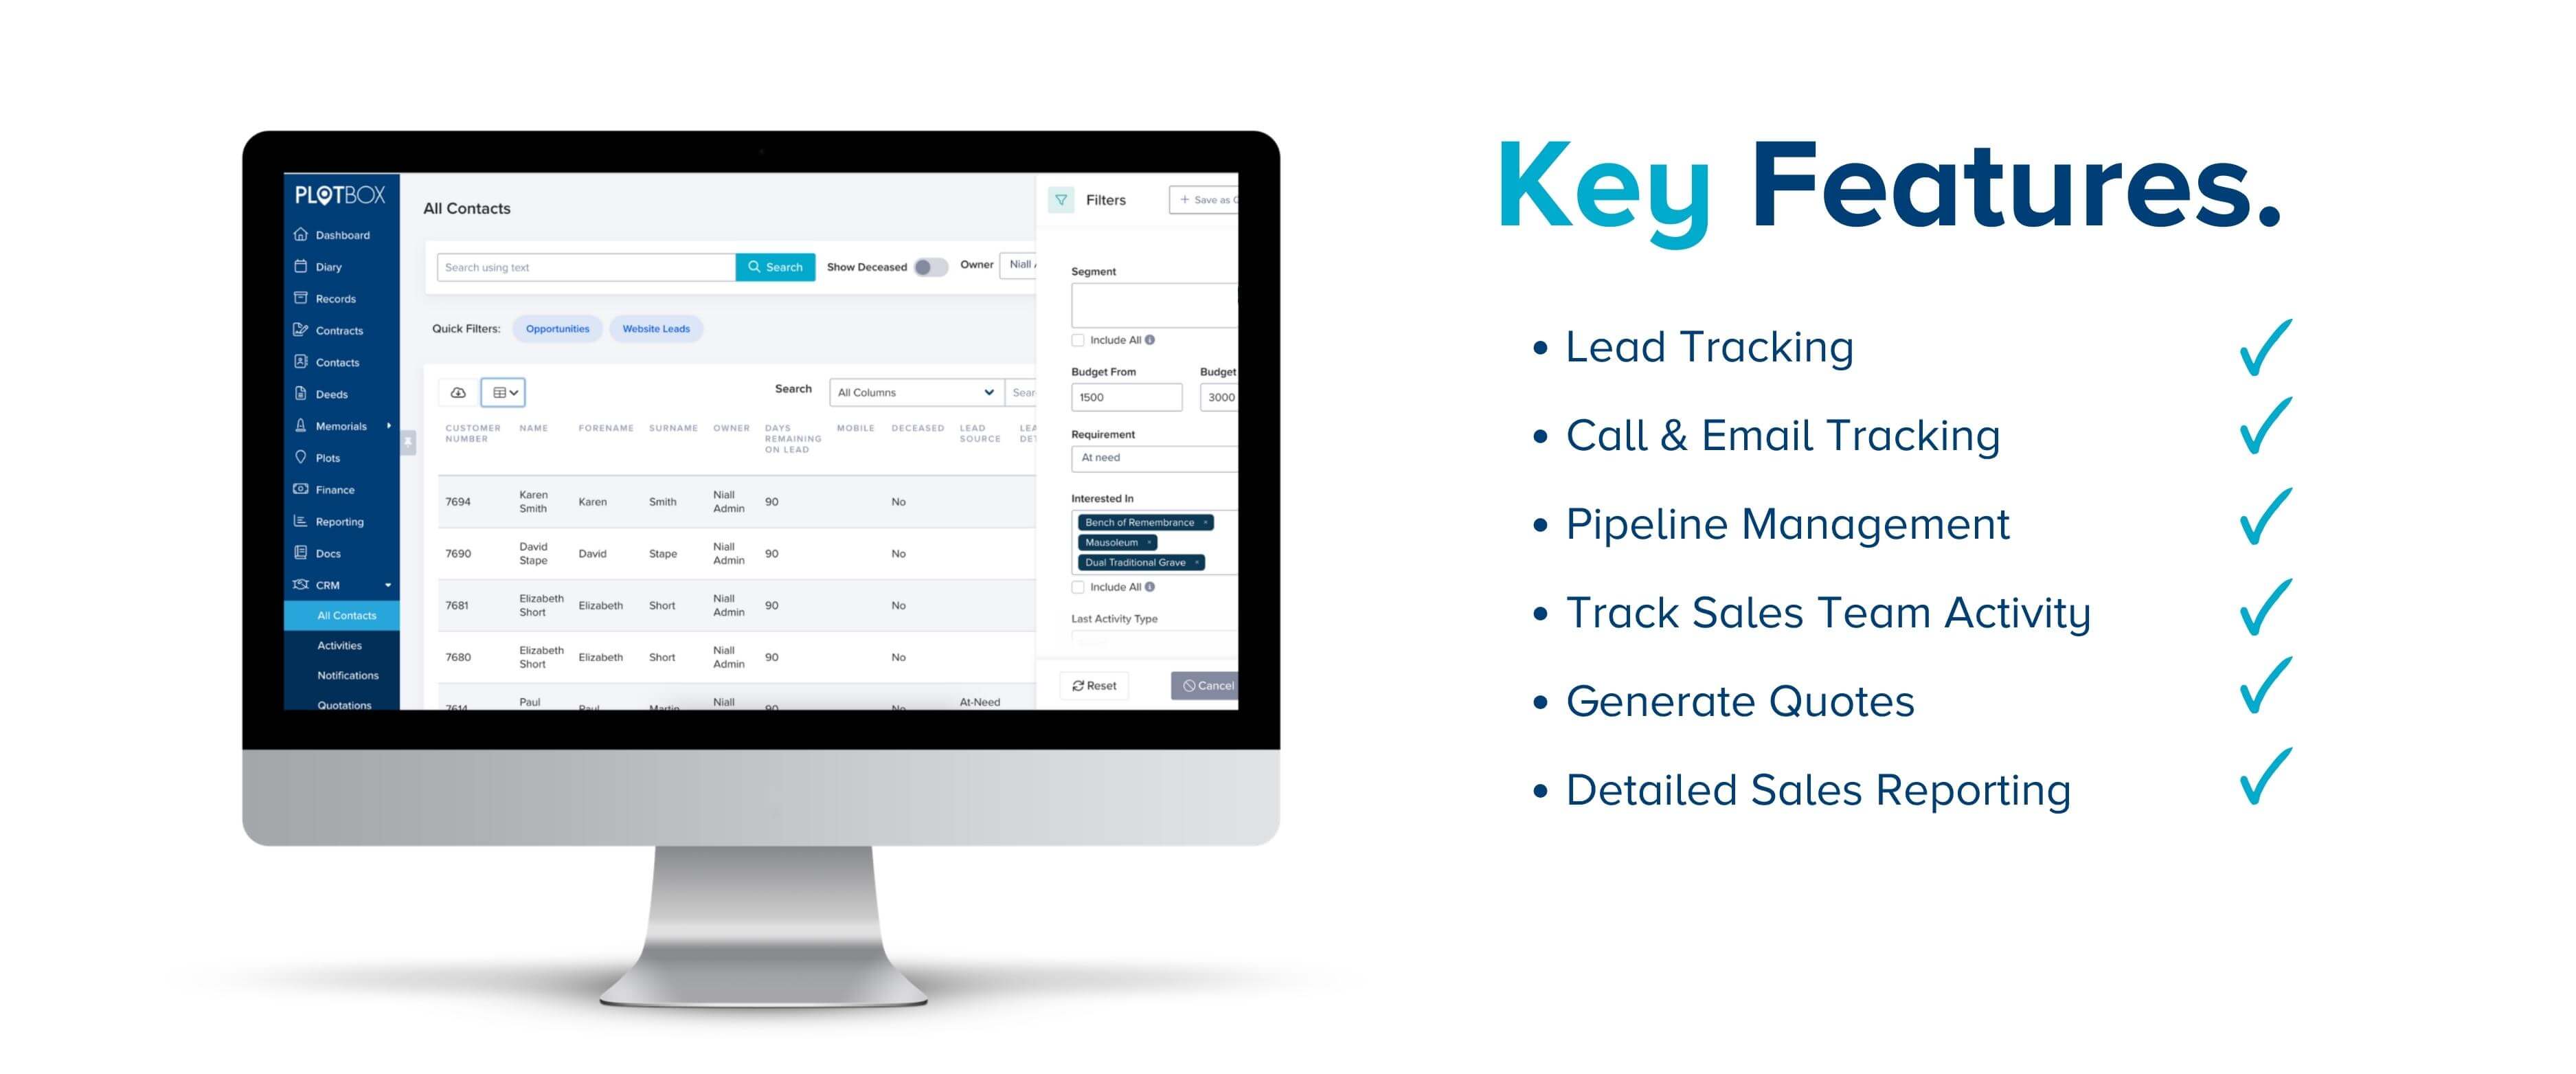 CRM Key Features 